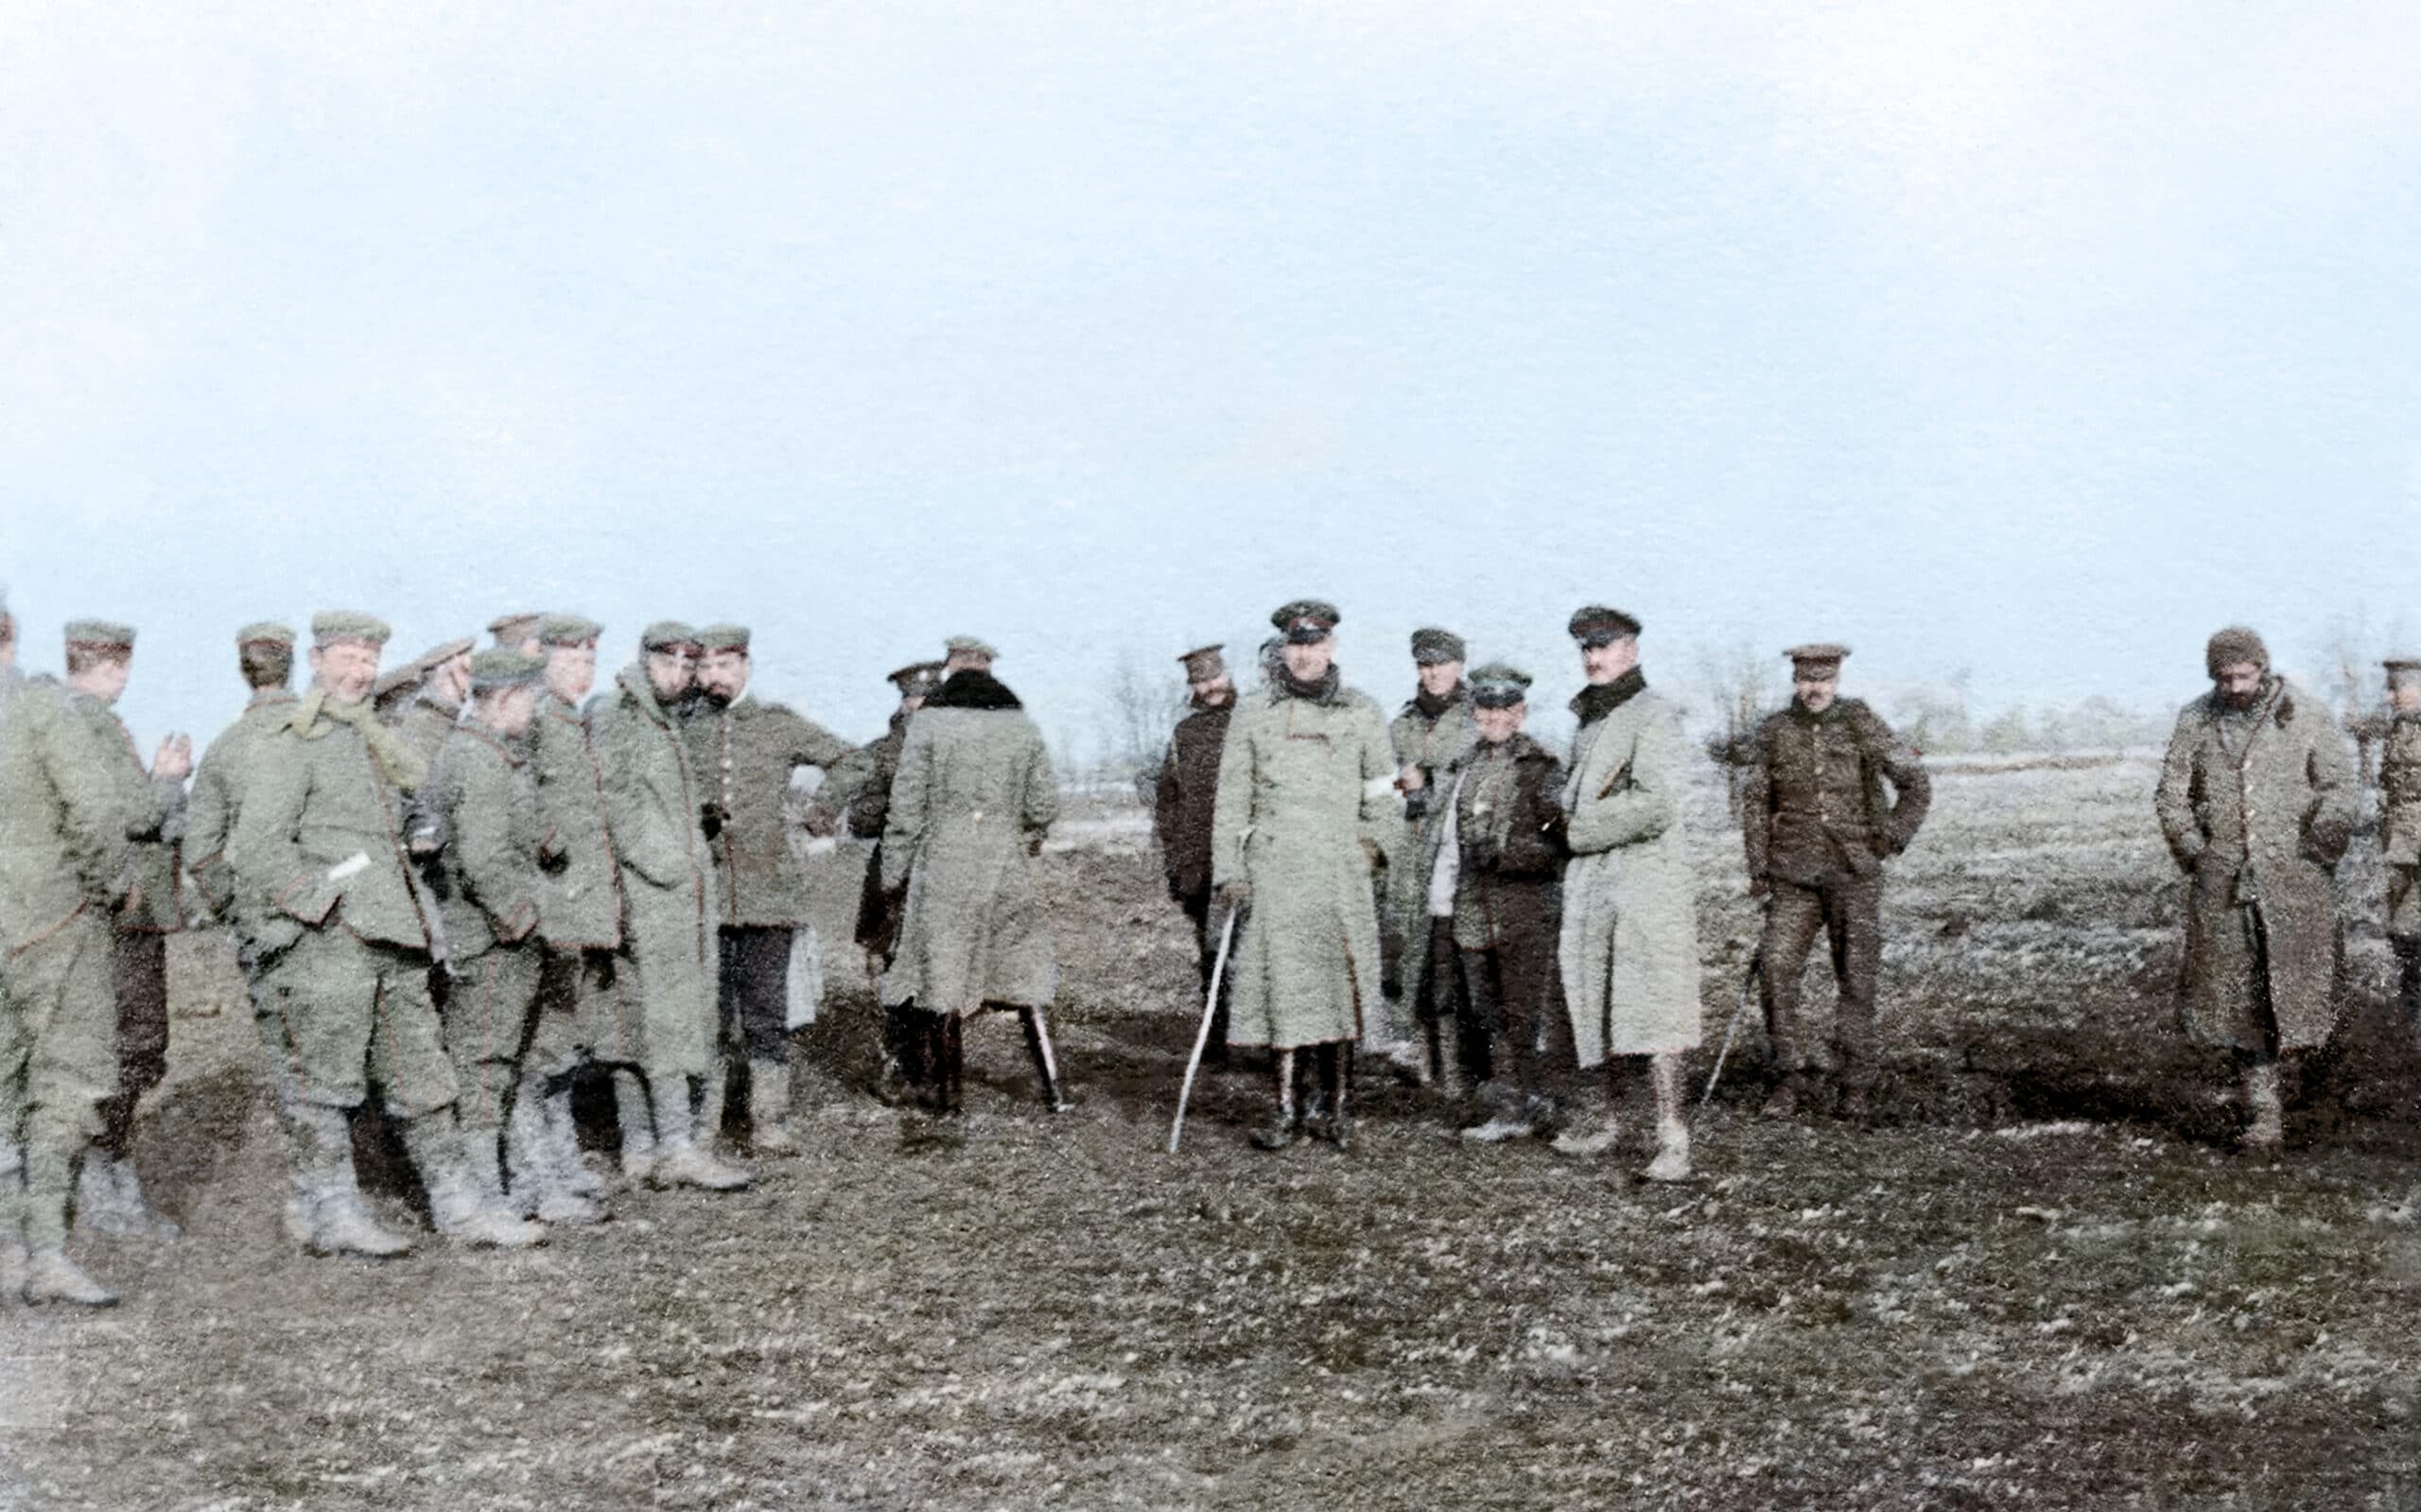 British troops from the Northumberland Hussars, 7th Division, Bridoux-Rouge Banc Sector and German soldiers and medical personnelmeeting in No-Mans's Land during the Christmas truce, 25th December 1914. Colorized photo: Cassowary Colorizations. (CC BY 2.0)